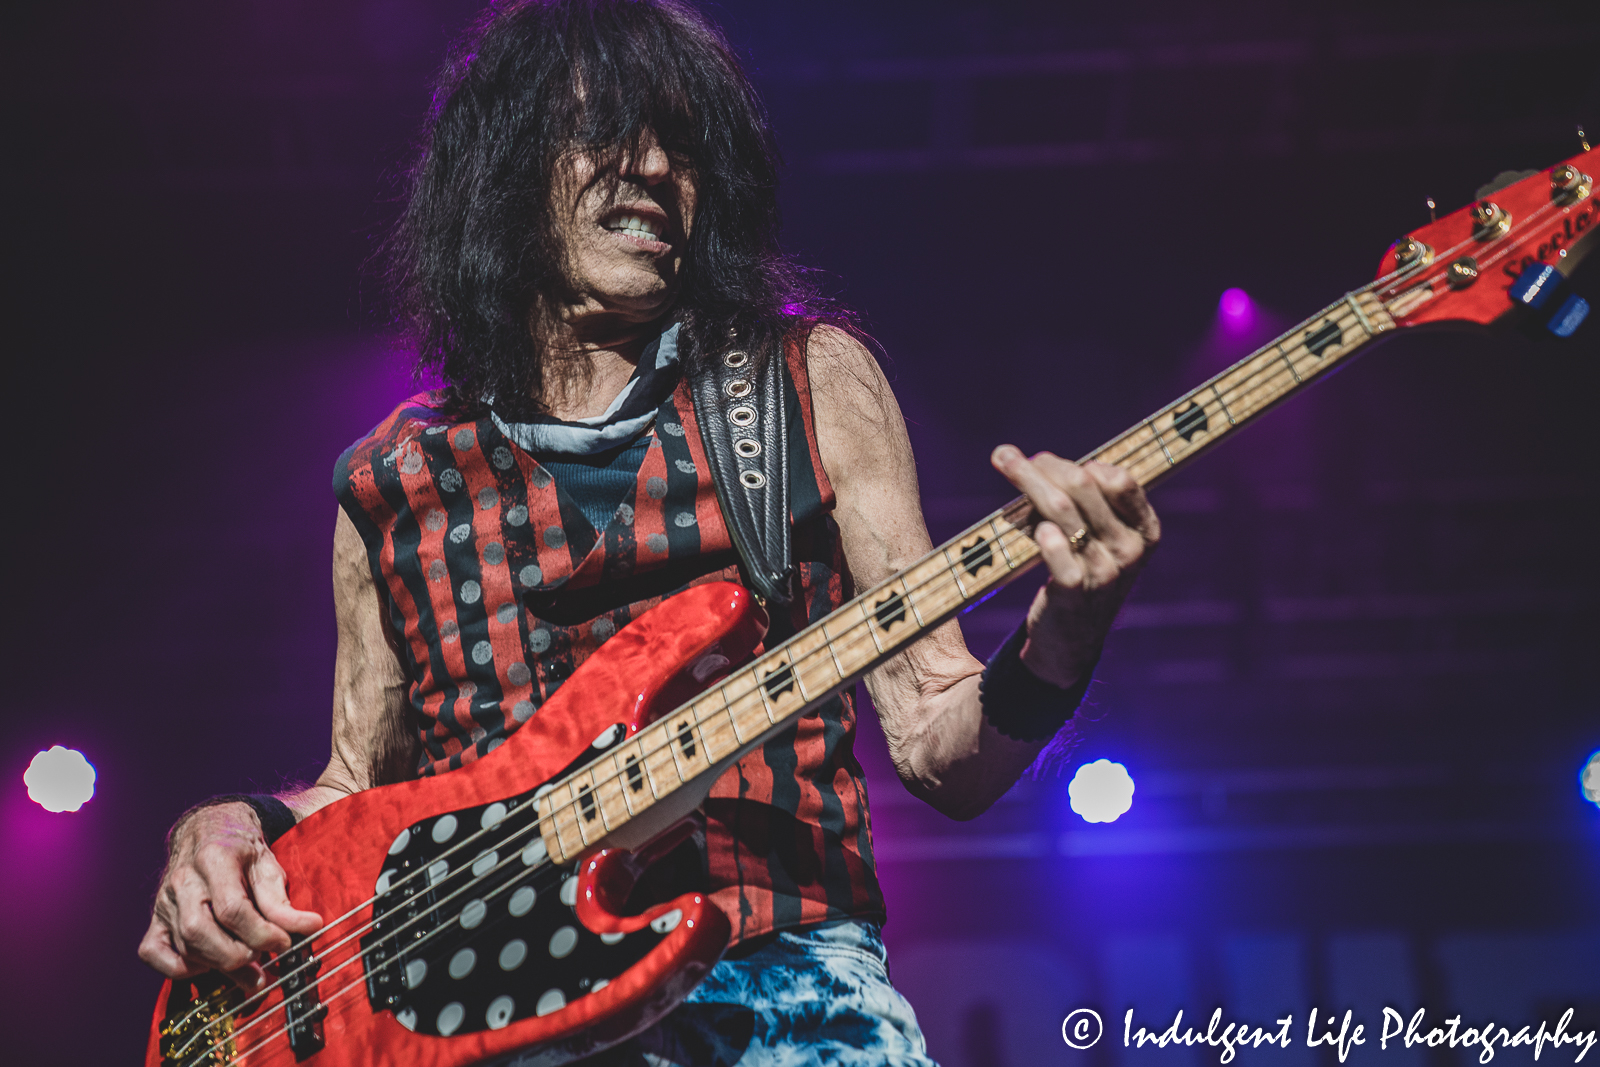 Quiet Riot founding member and bass player Rudy Sarzo performing live in concert at Ameristar Casino in Kansas City, MO on July 29, 2022.